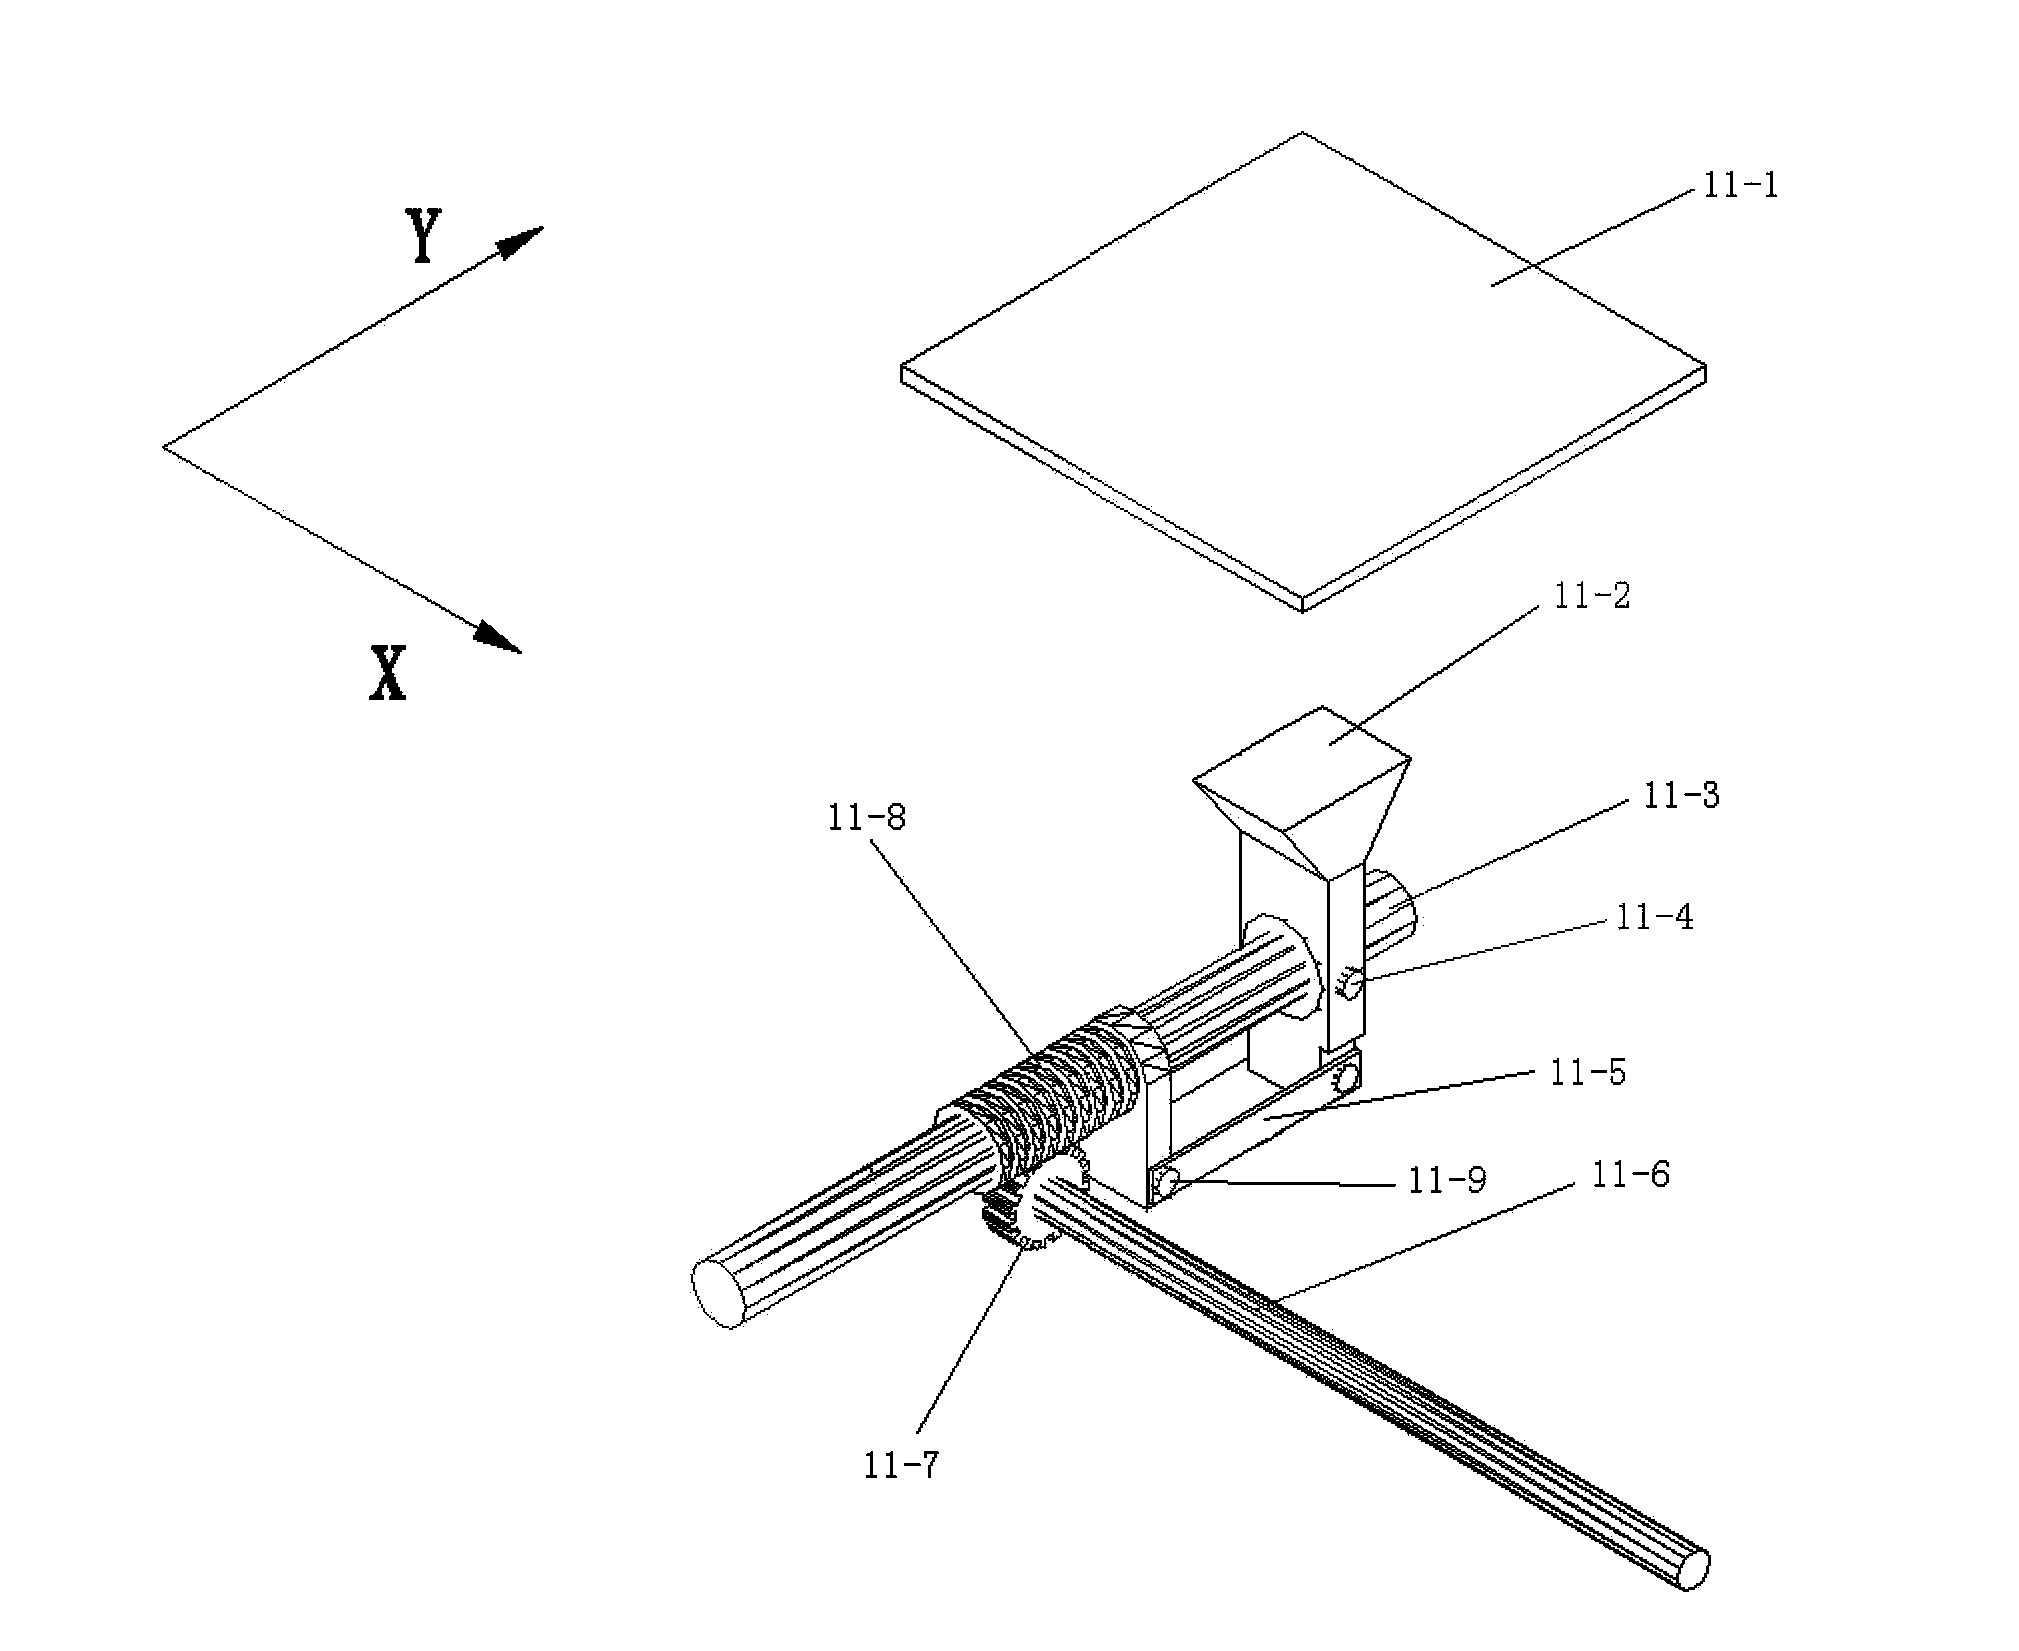 Tracking control mechanism of array collecting lens